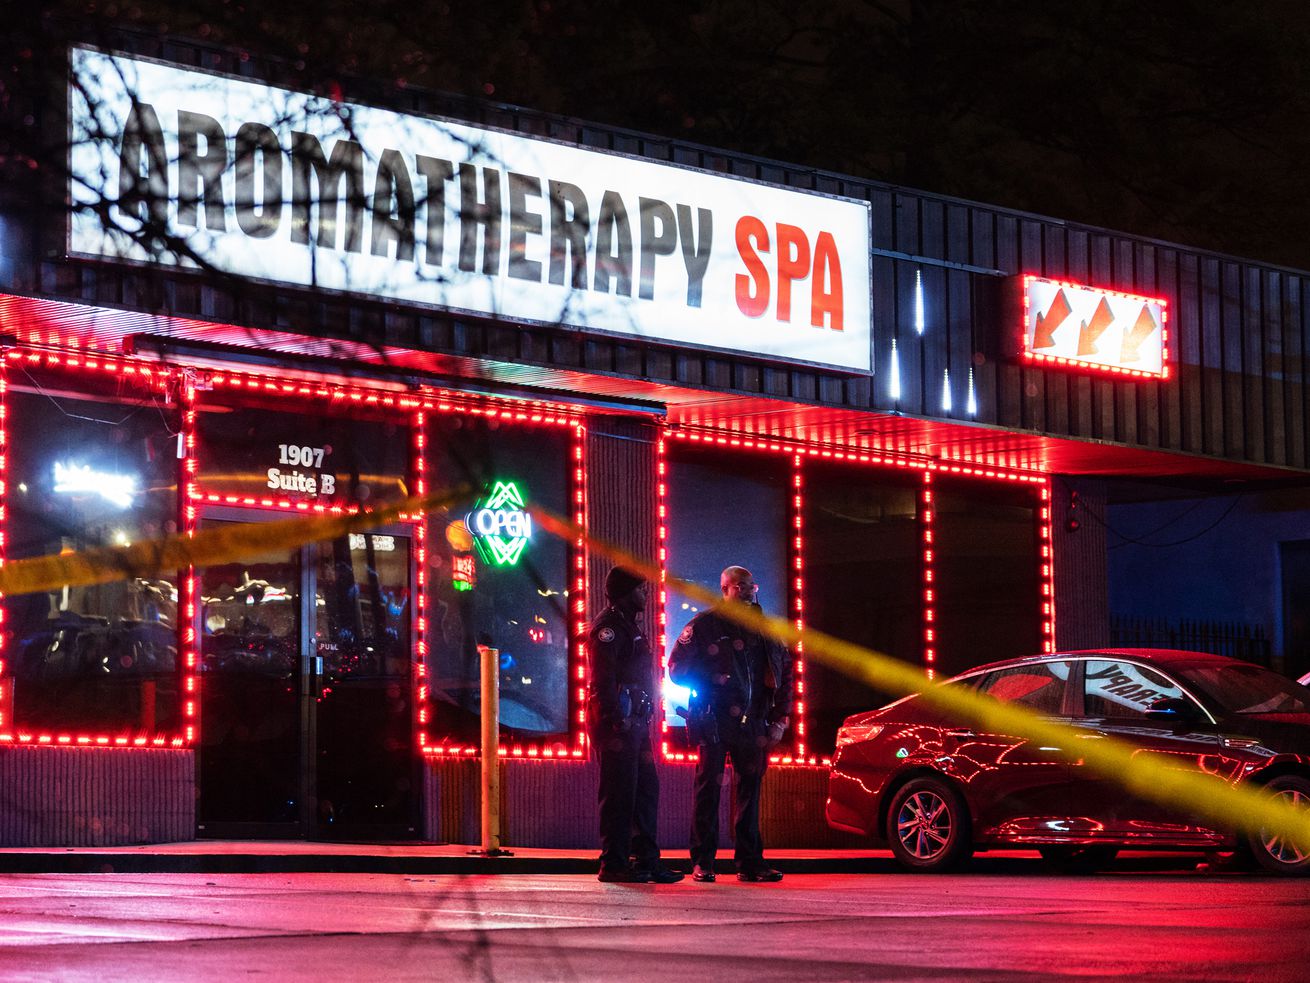 What we know about the Atlanta shootings that left 8 dead at Asian businesses